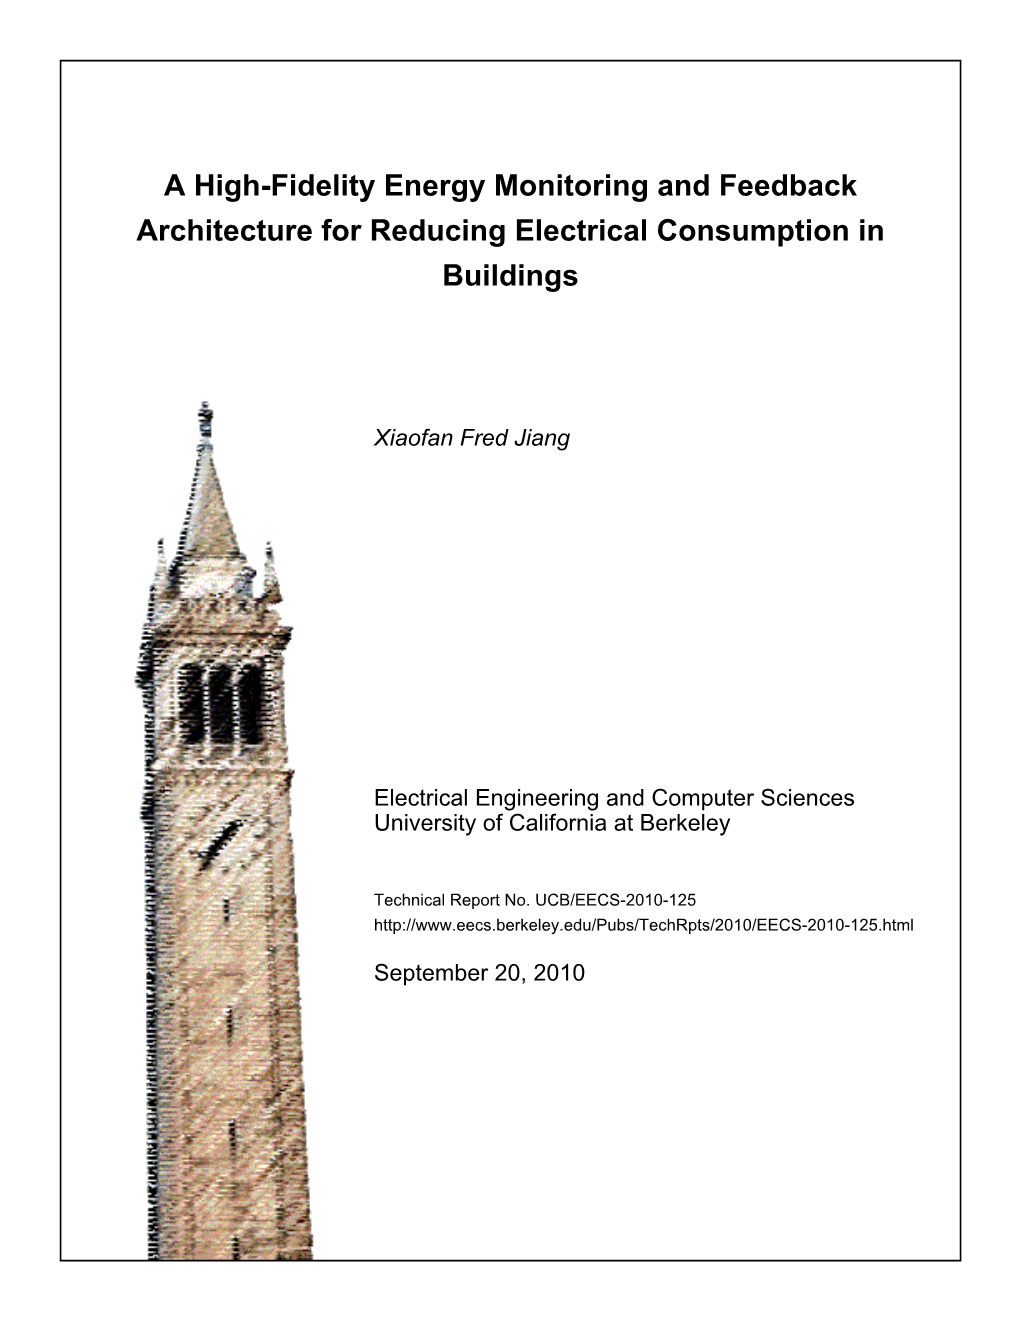 A High-Fidelity Energy Monitoring and Feedback Architecture for Reducing Electrical Consumption in Buildings